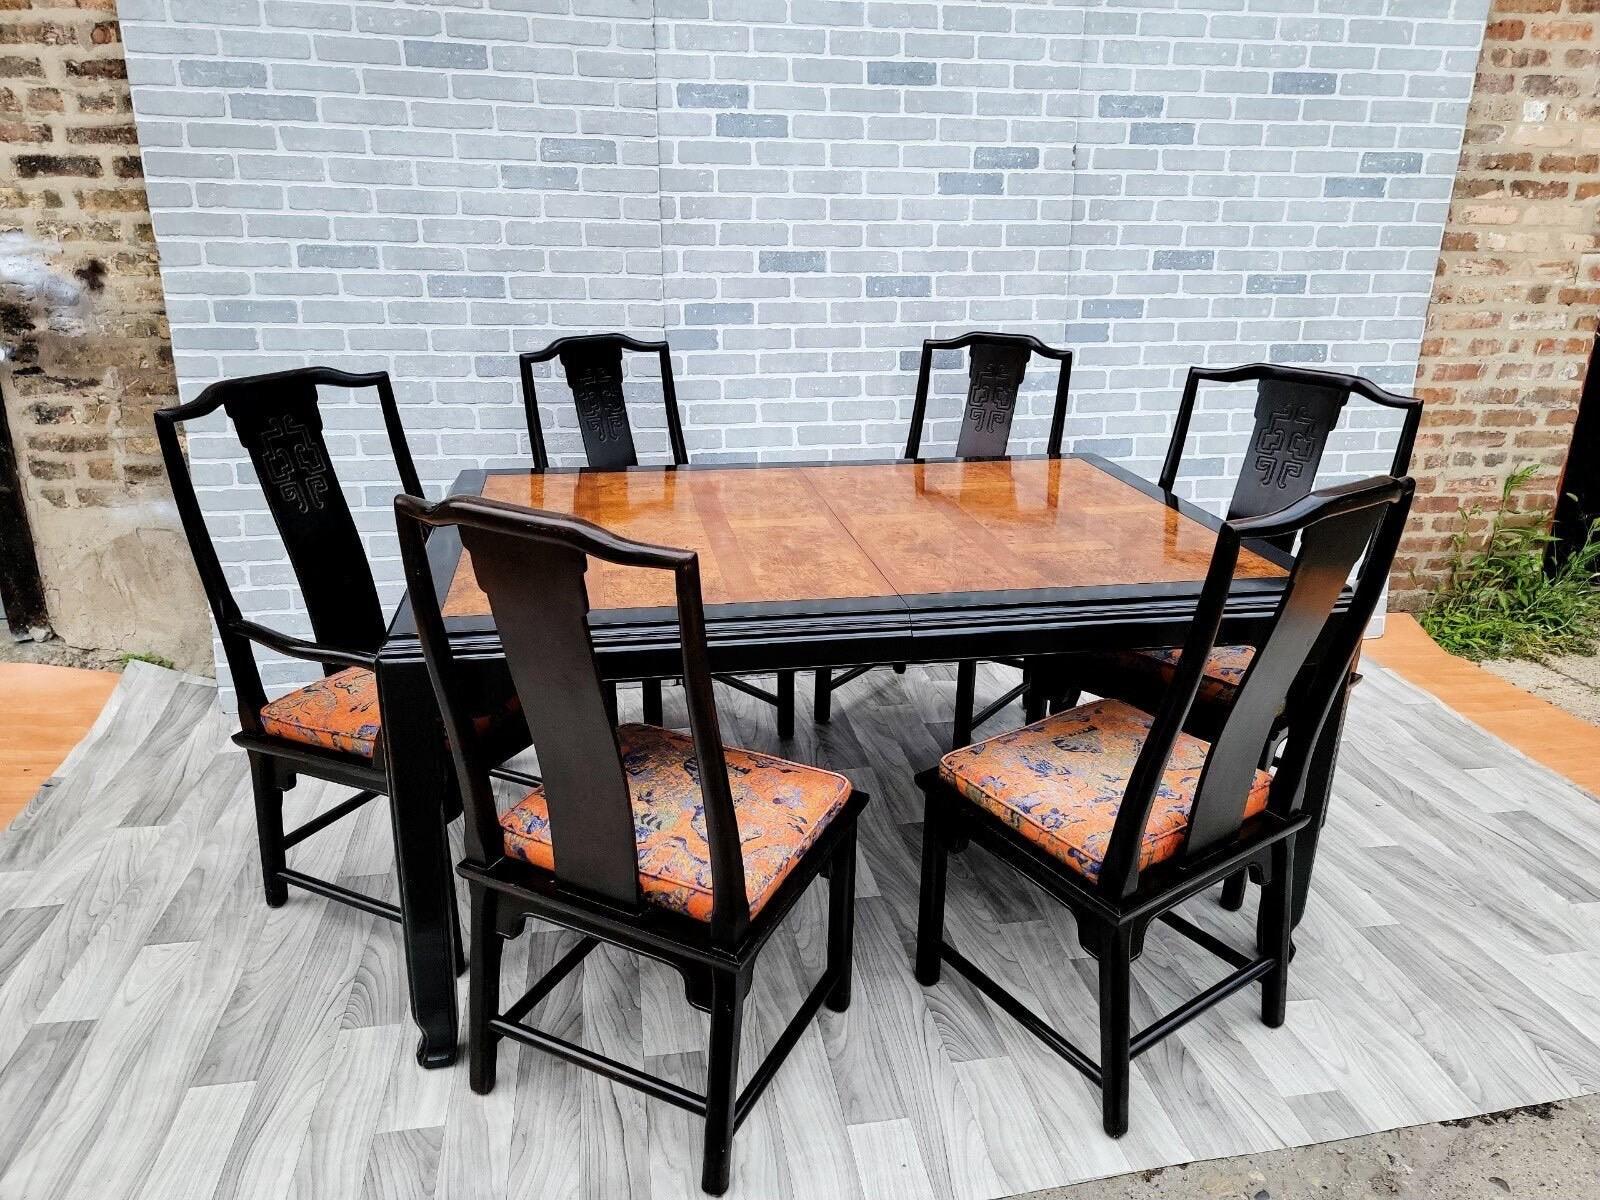 Hollywood Regency Chinoiserie Chin Hua Ebonized Dining Set By Raymond K. Sobota for Century Furniture - 8 Piece Set 

This gorgeous Asian Style dining set includes 4 side and 2 armchairs and a fabulous dining table designed by Raymond K. Sobota